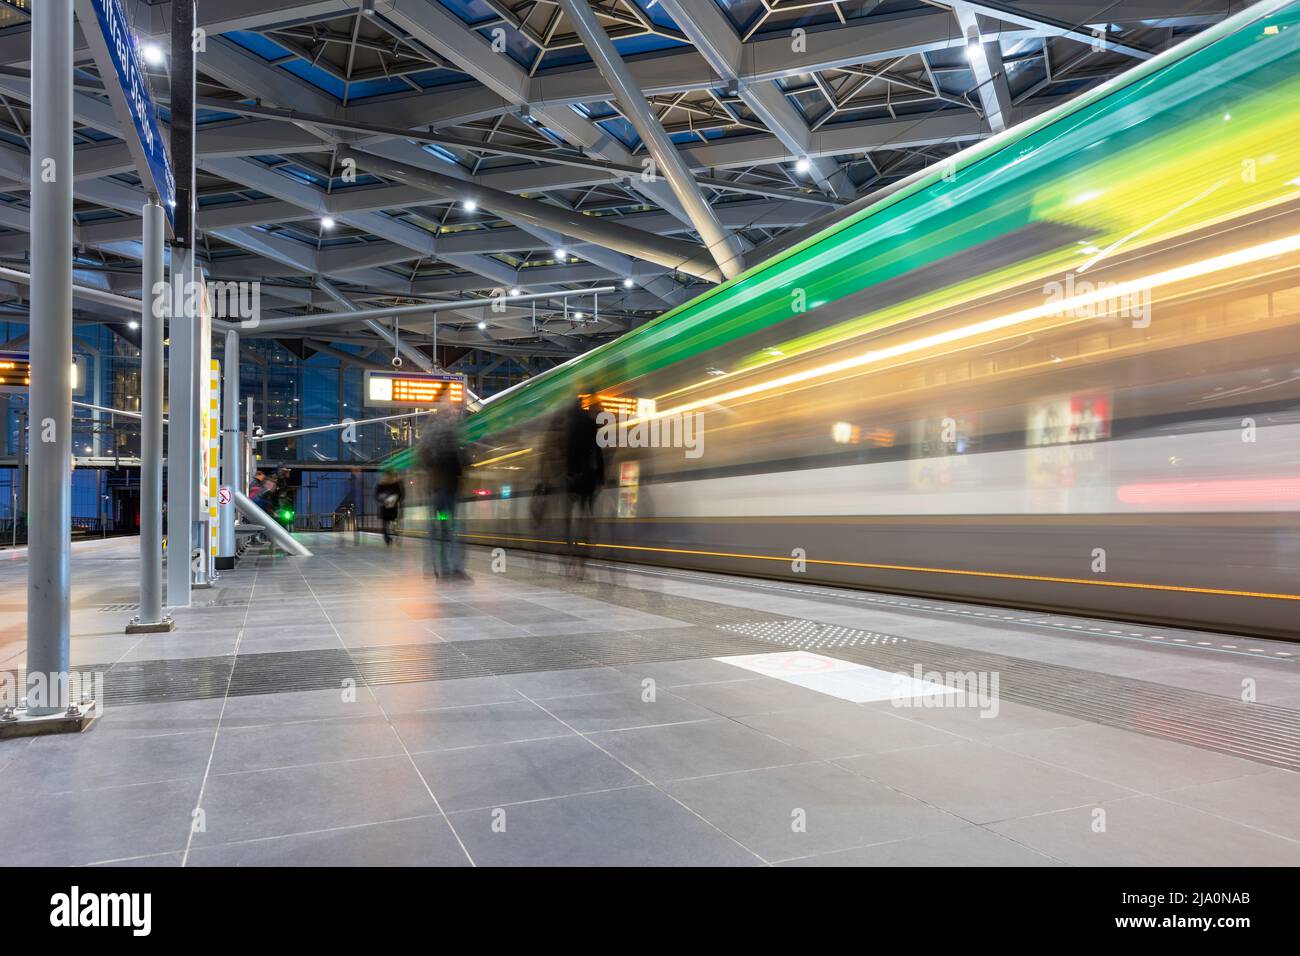 A modern tram arriving at Haag Station in Holland Stock Photo